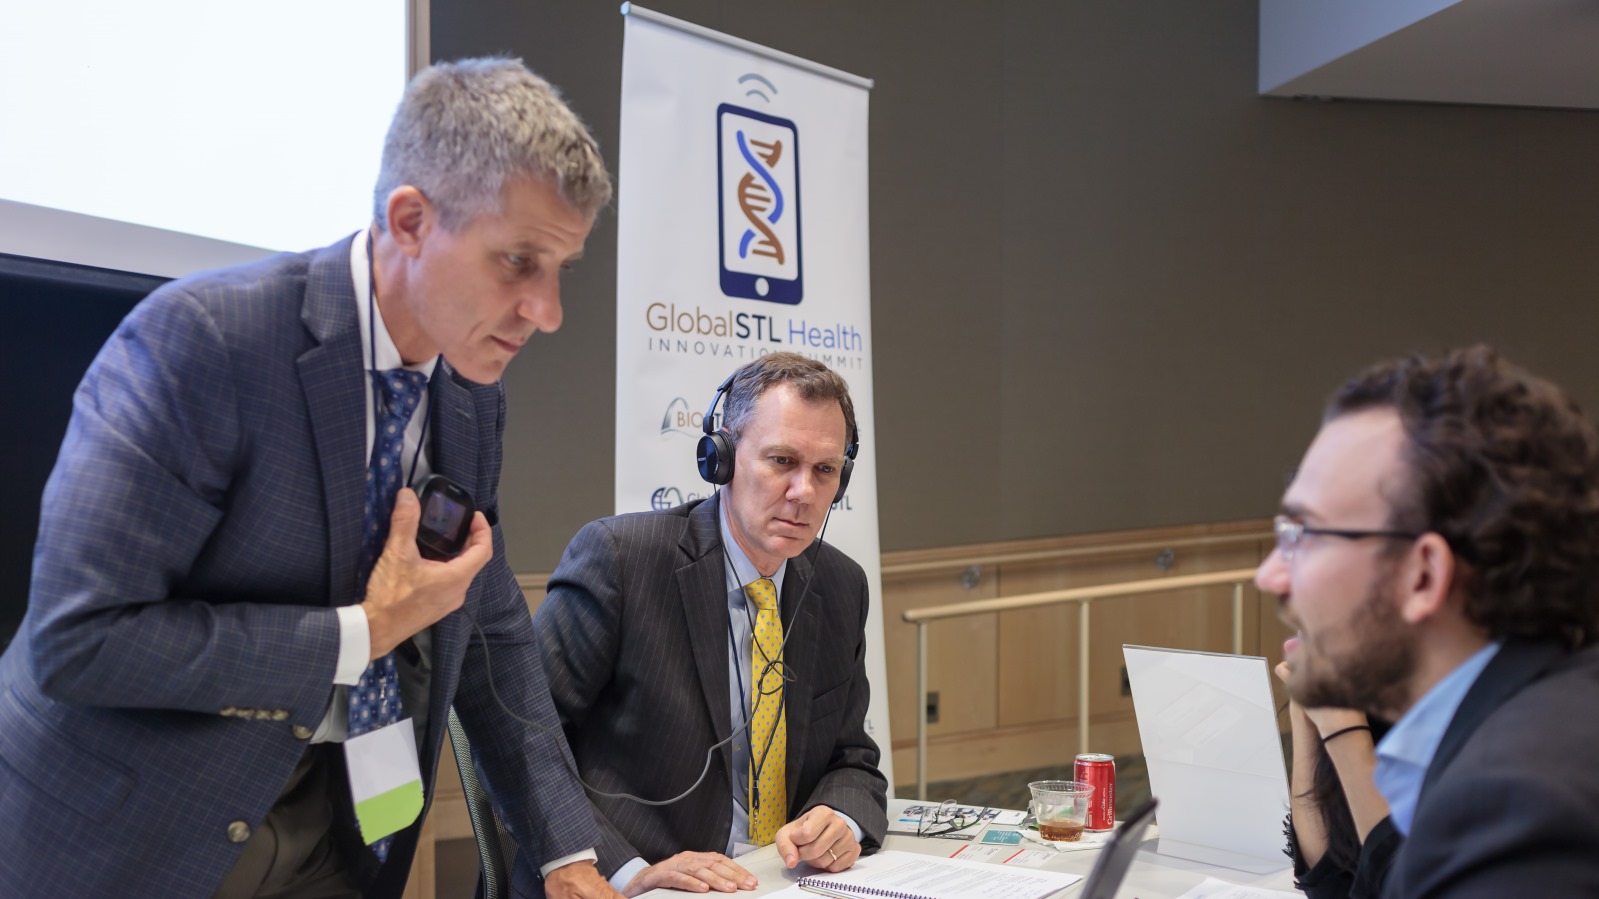 Officials from the Centene healthcare company in St. Louis trying the TytoCare home health exam device at the 2018 GlobalSTL Health Innovation Summit. Photo: courtesy